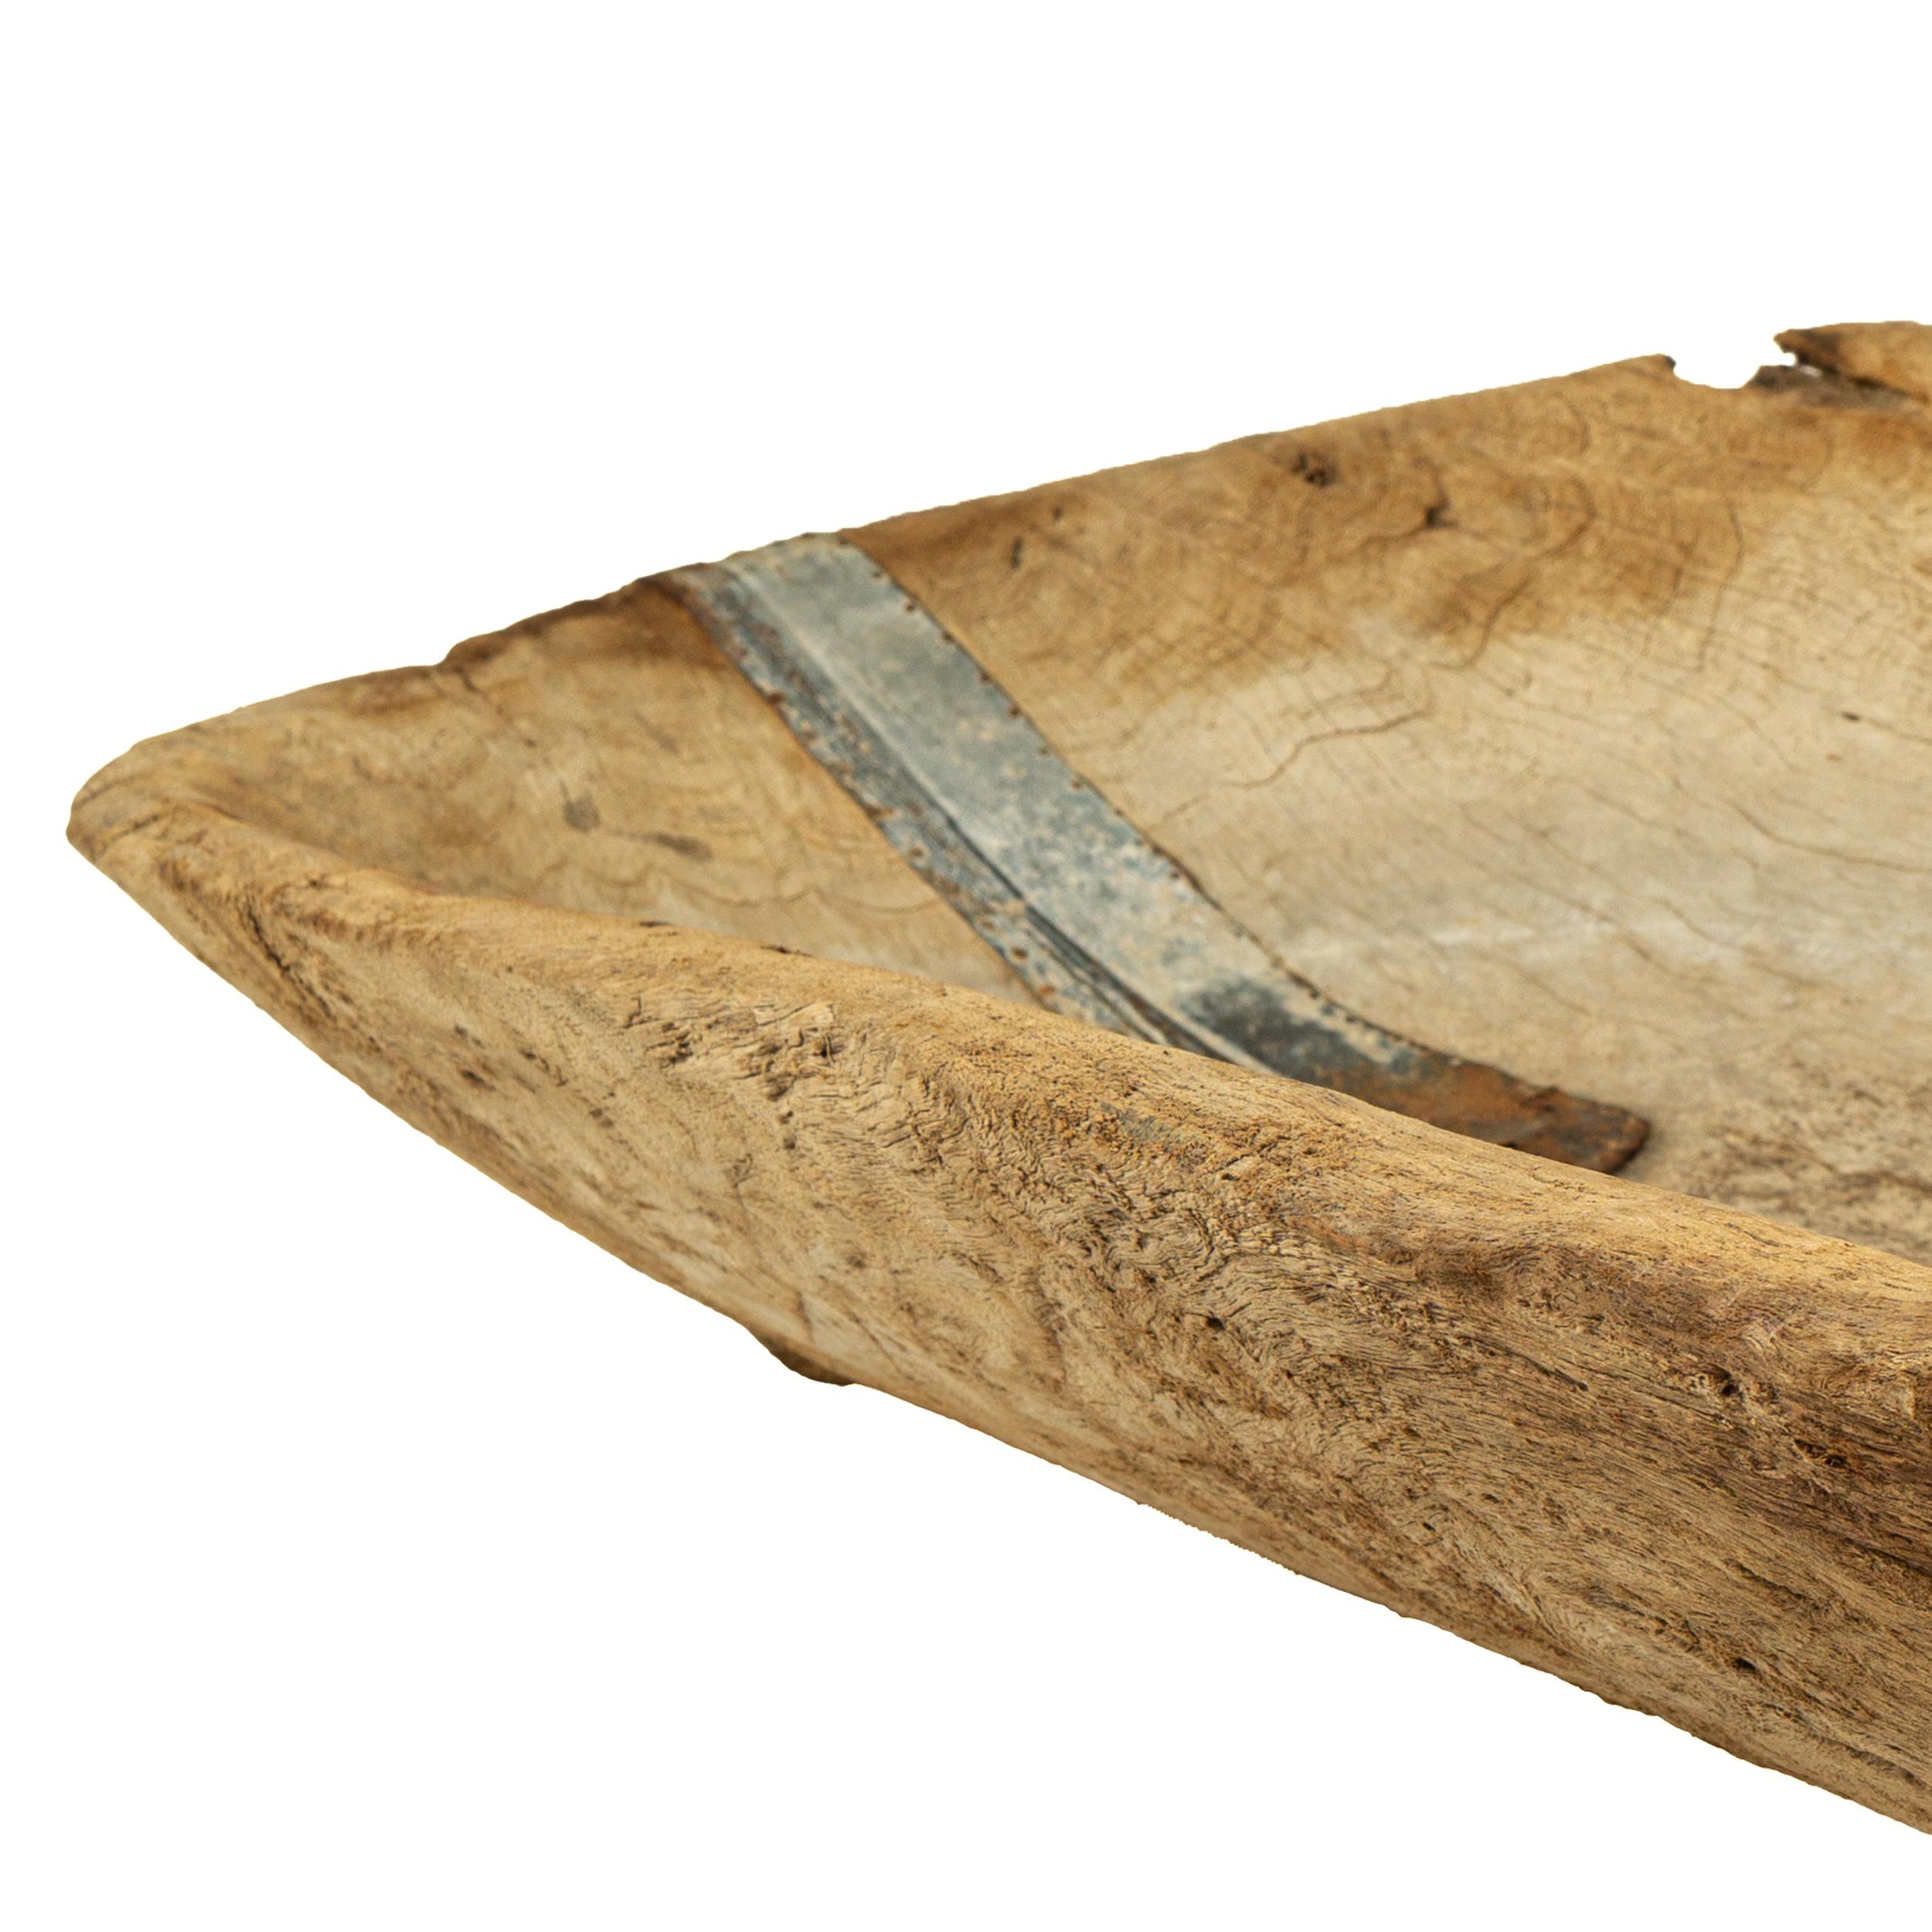 Remarkable Mesquite Wood Trough Bowl Found in Jalisco, Western Mexico, Mid 19th  For Sale 3